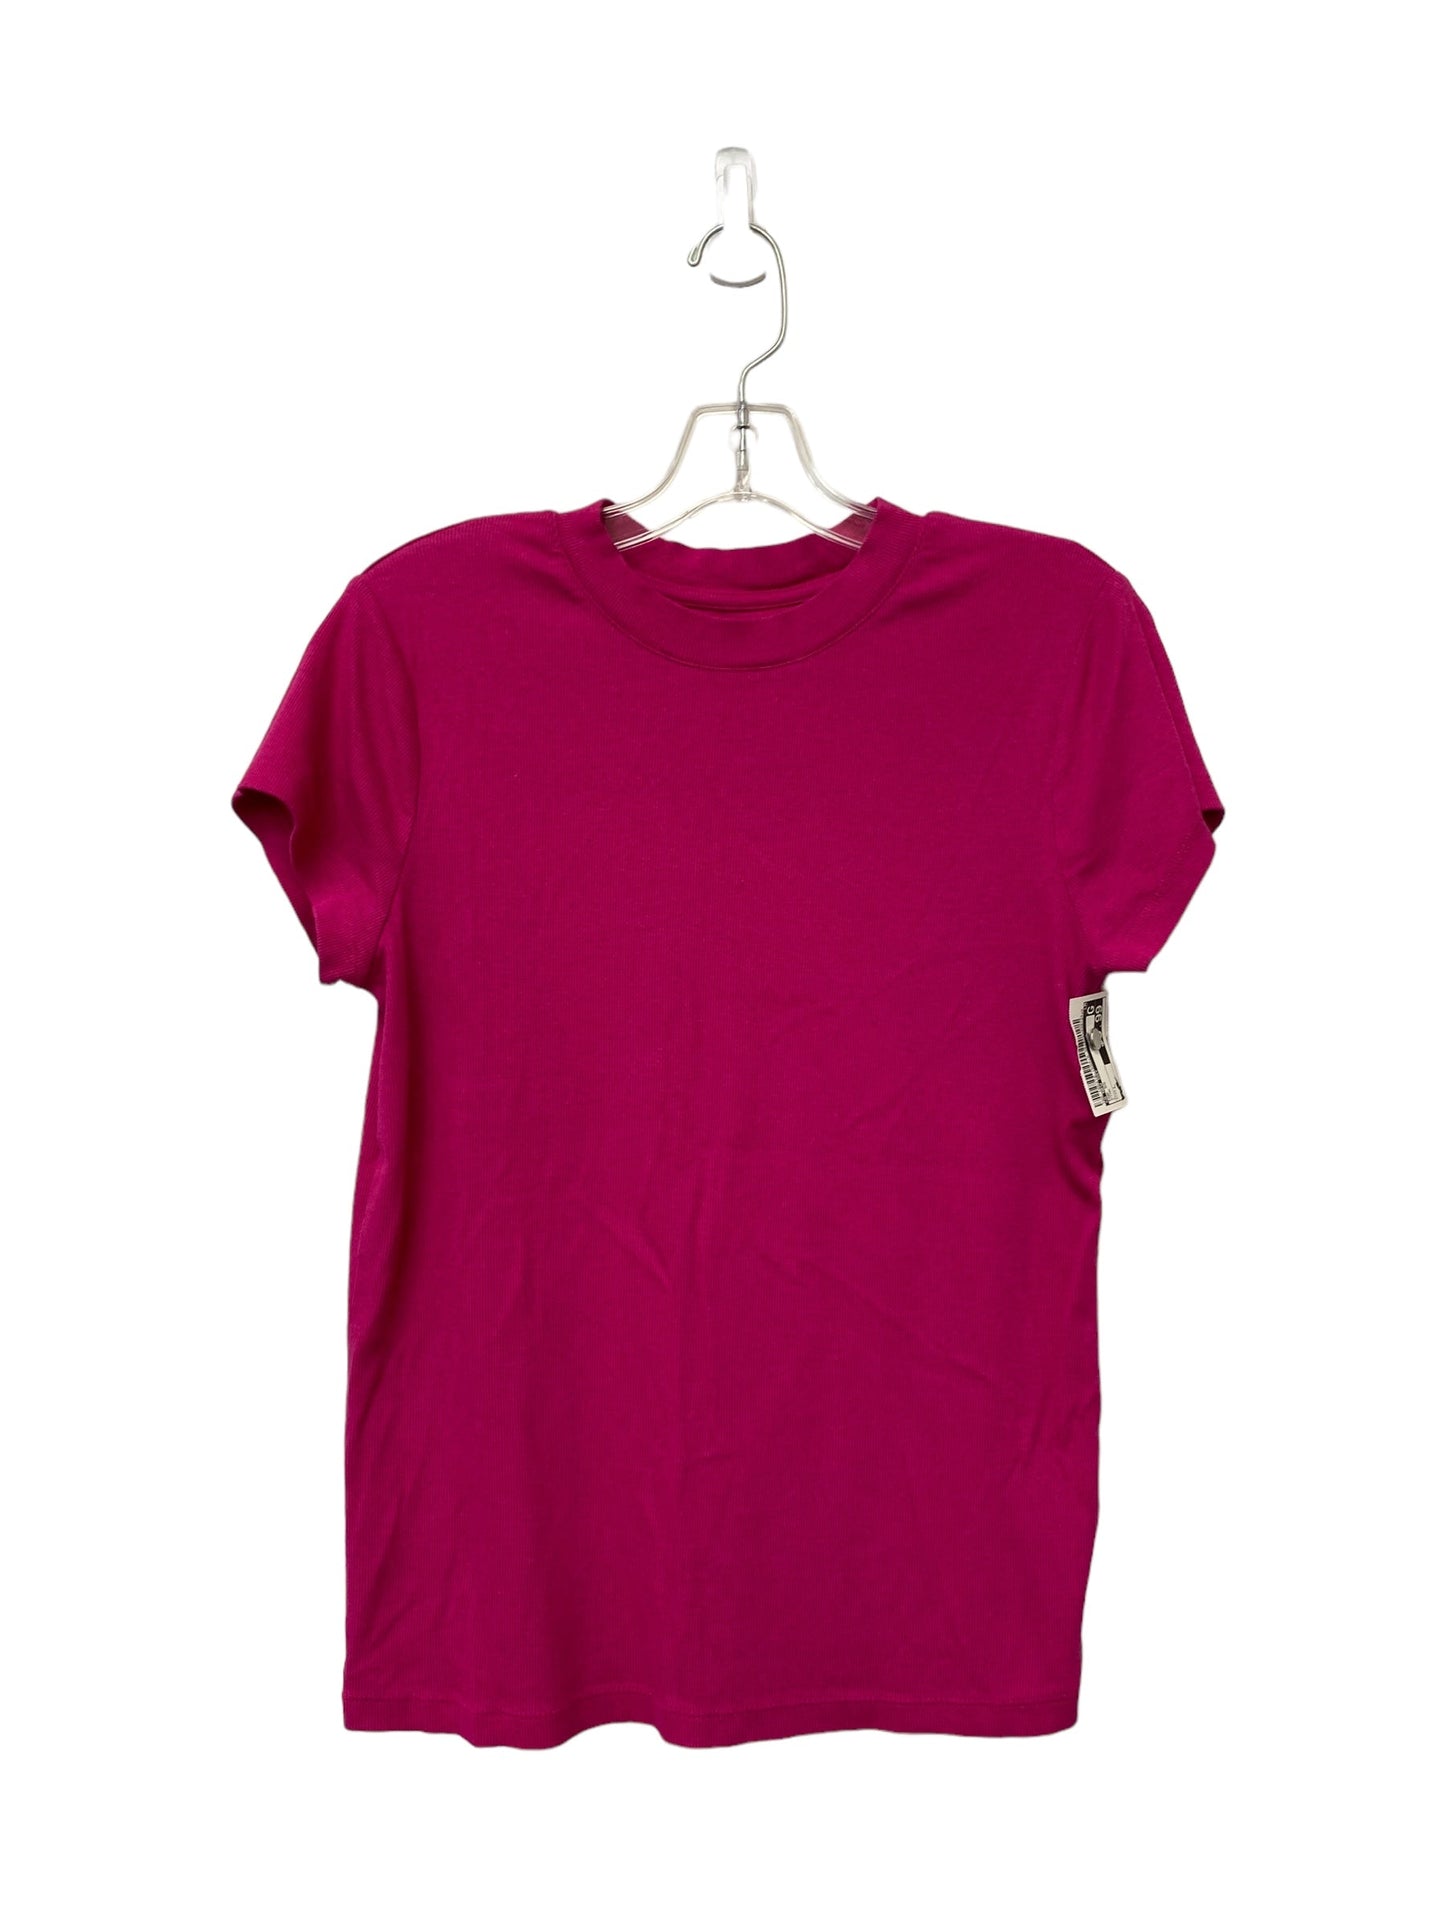 Pink Top Short Sleeve A New Day, Size L